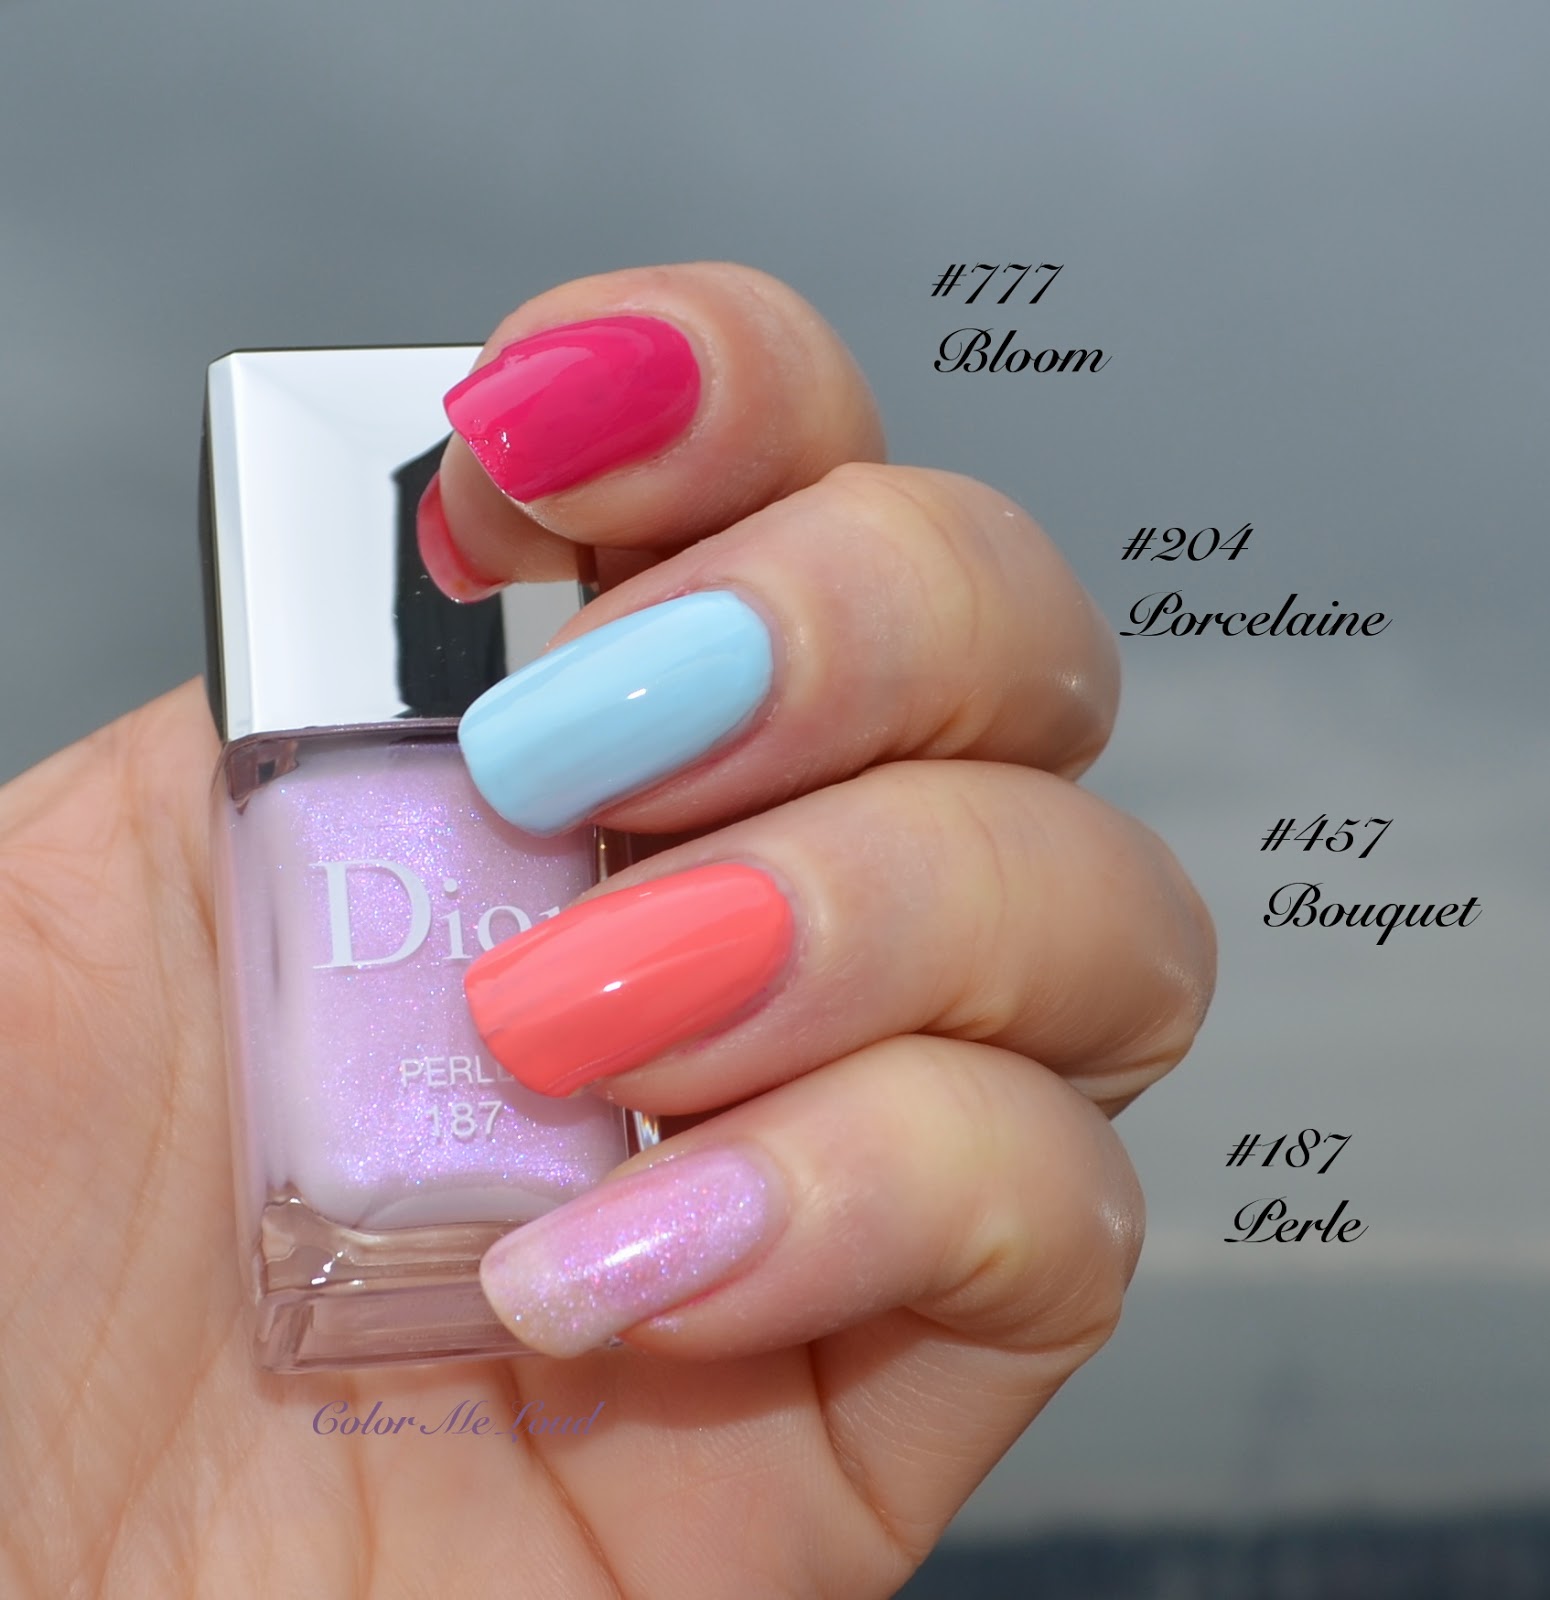 Dior Spring 2014 Nails: Dior Vernis Trianon Edition Swatched and